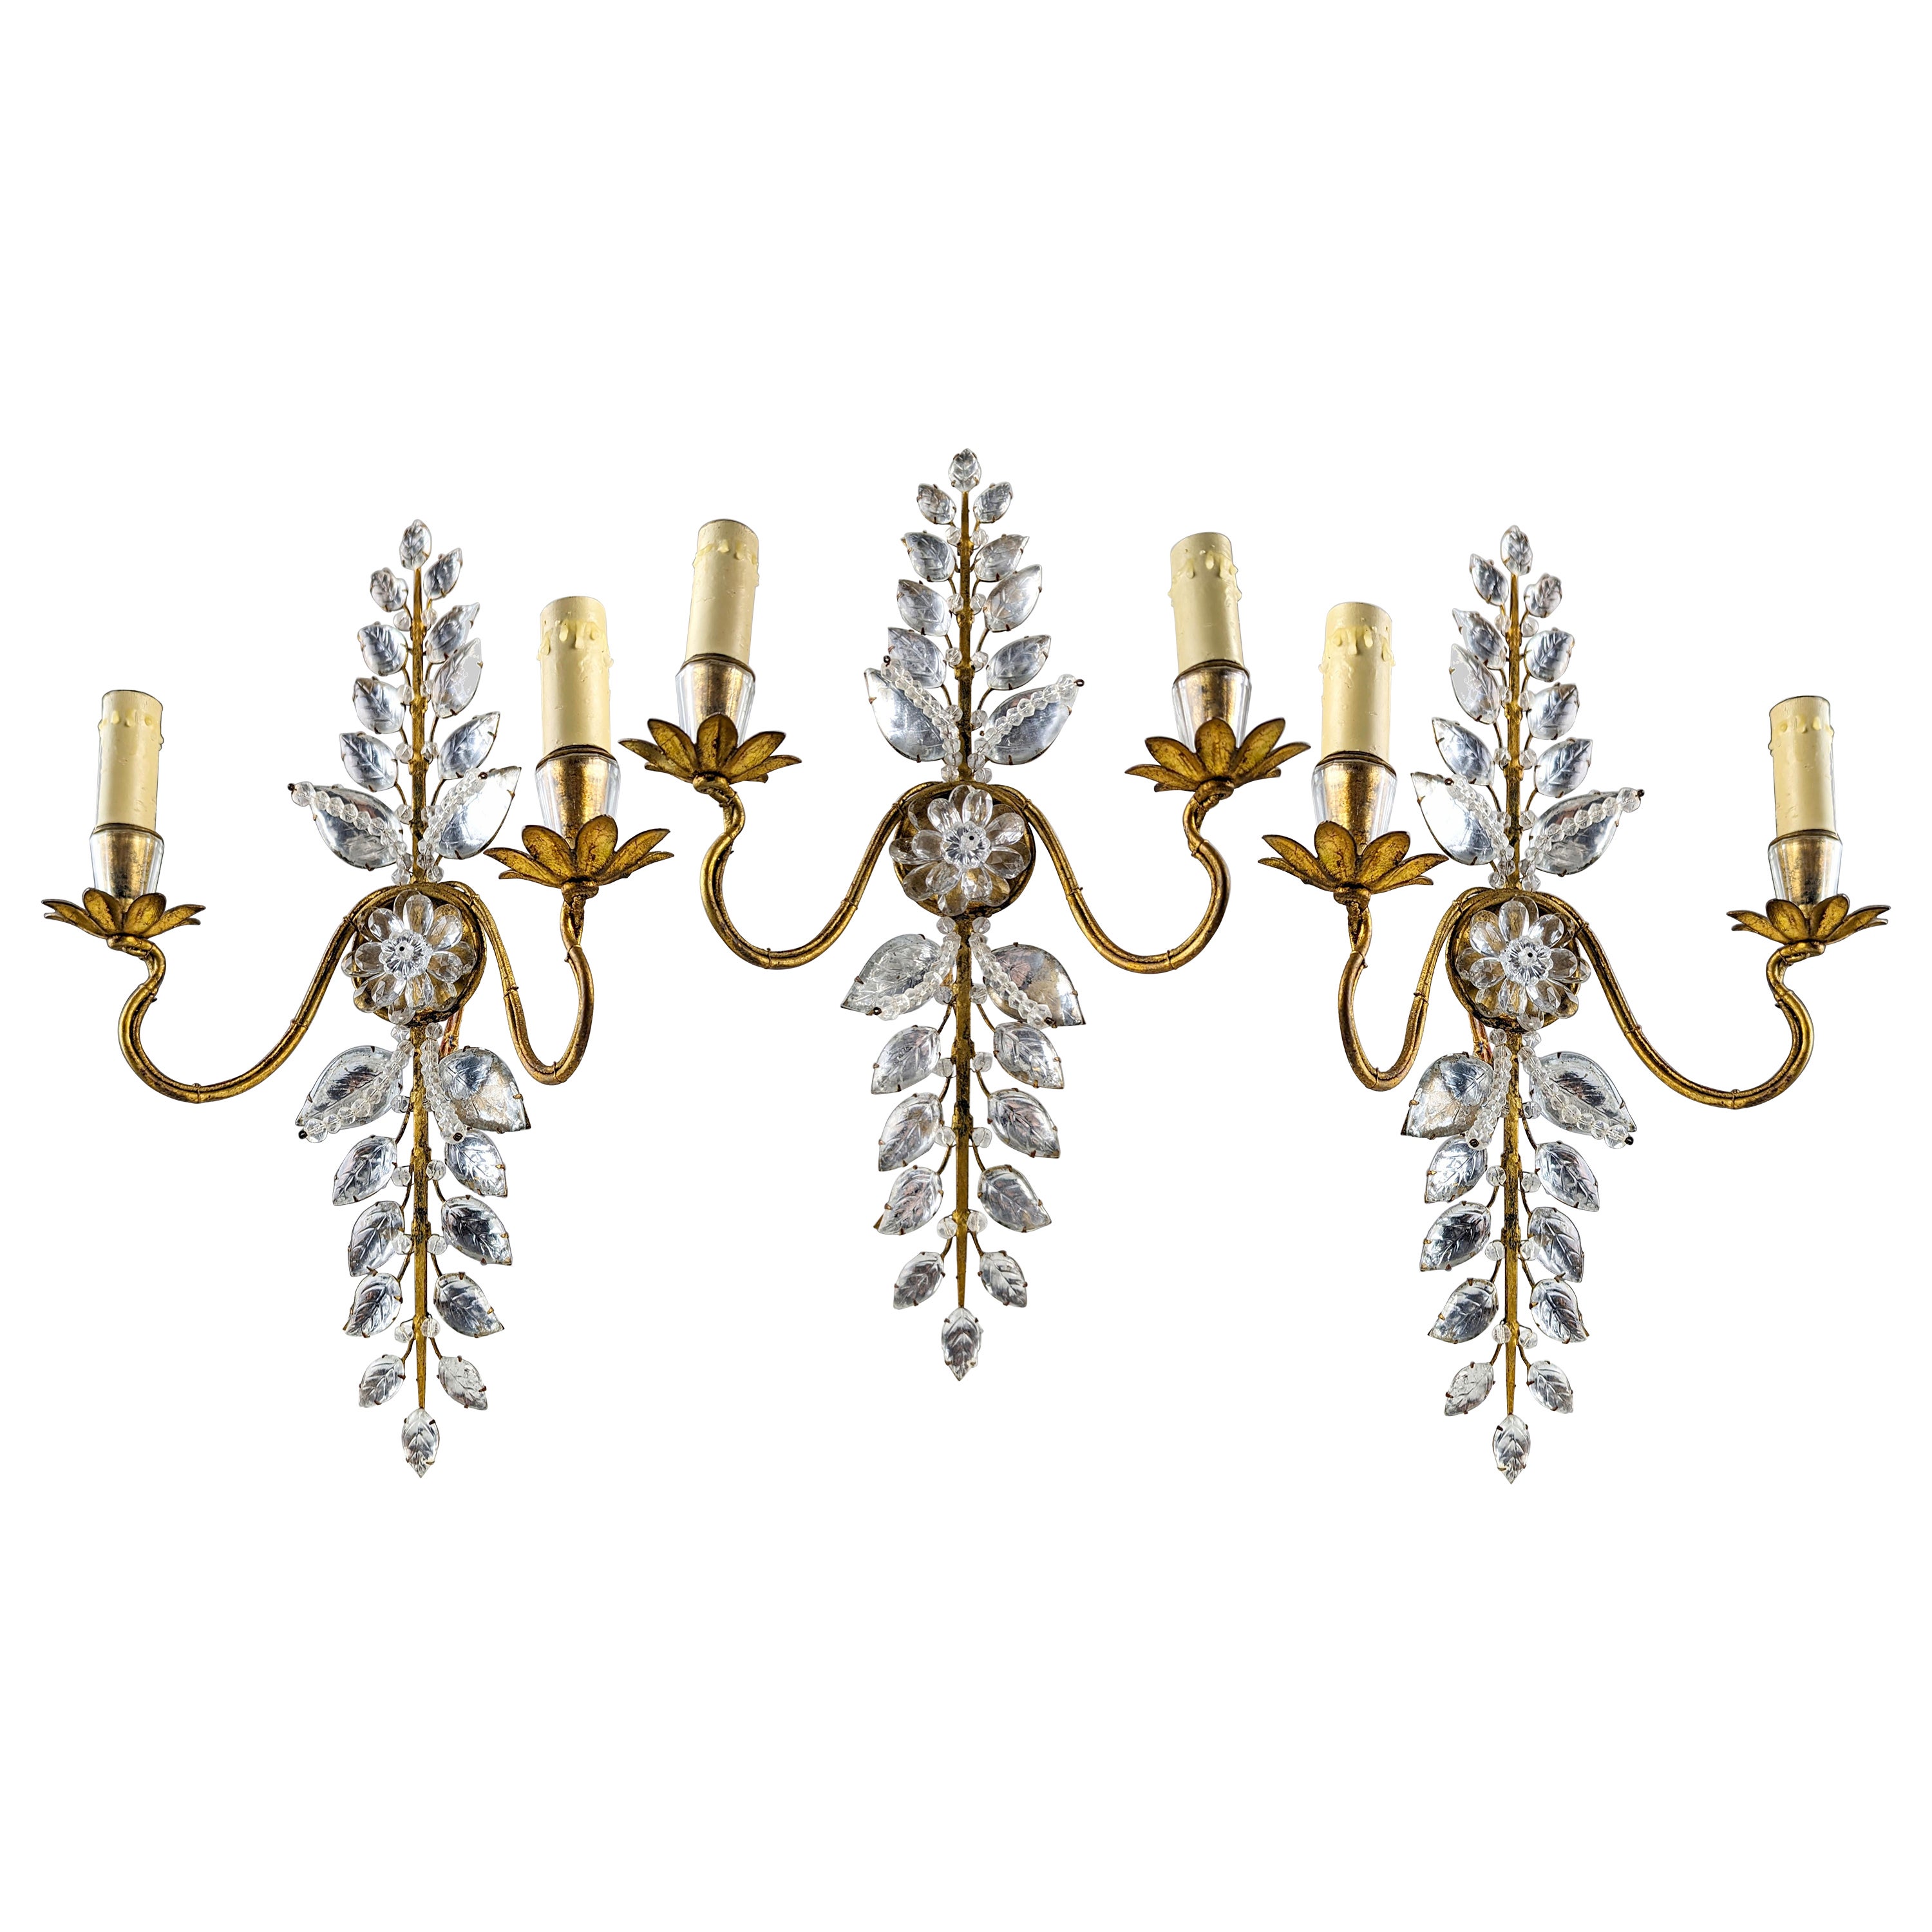 Set of three floral sconces by Maison Bagues in crystal and gold metal